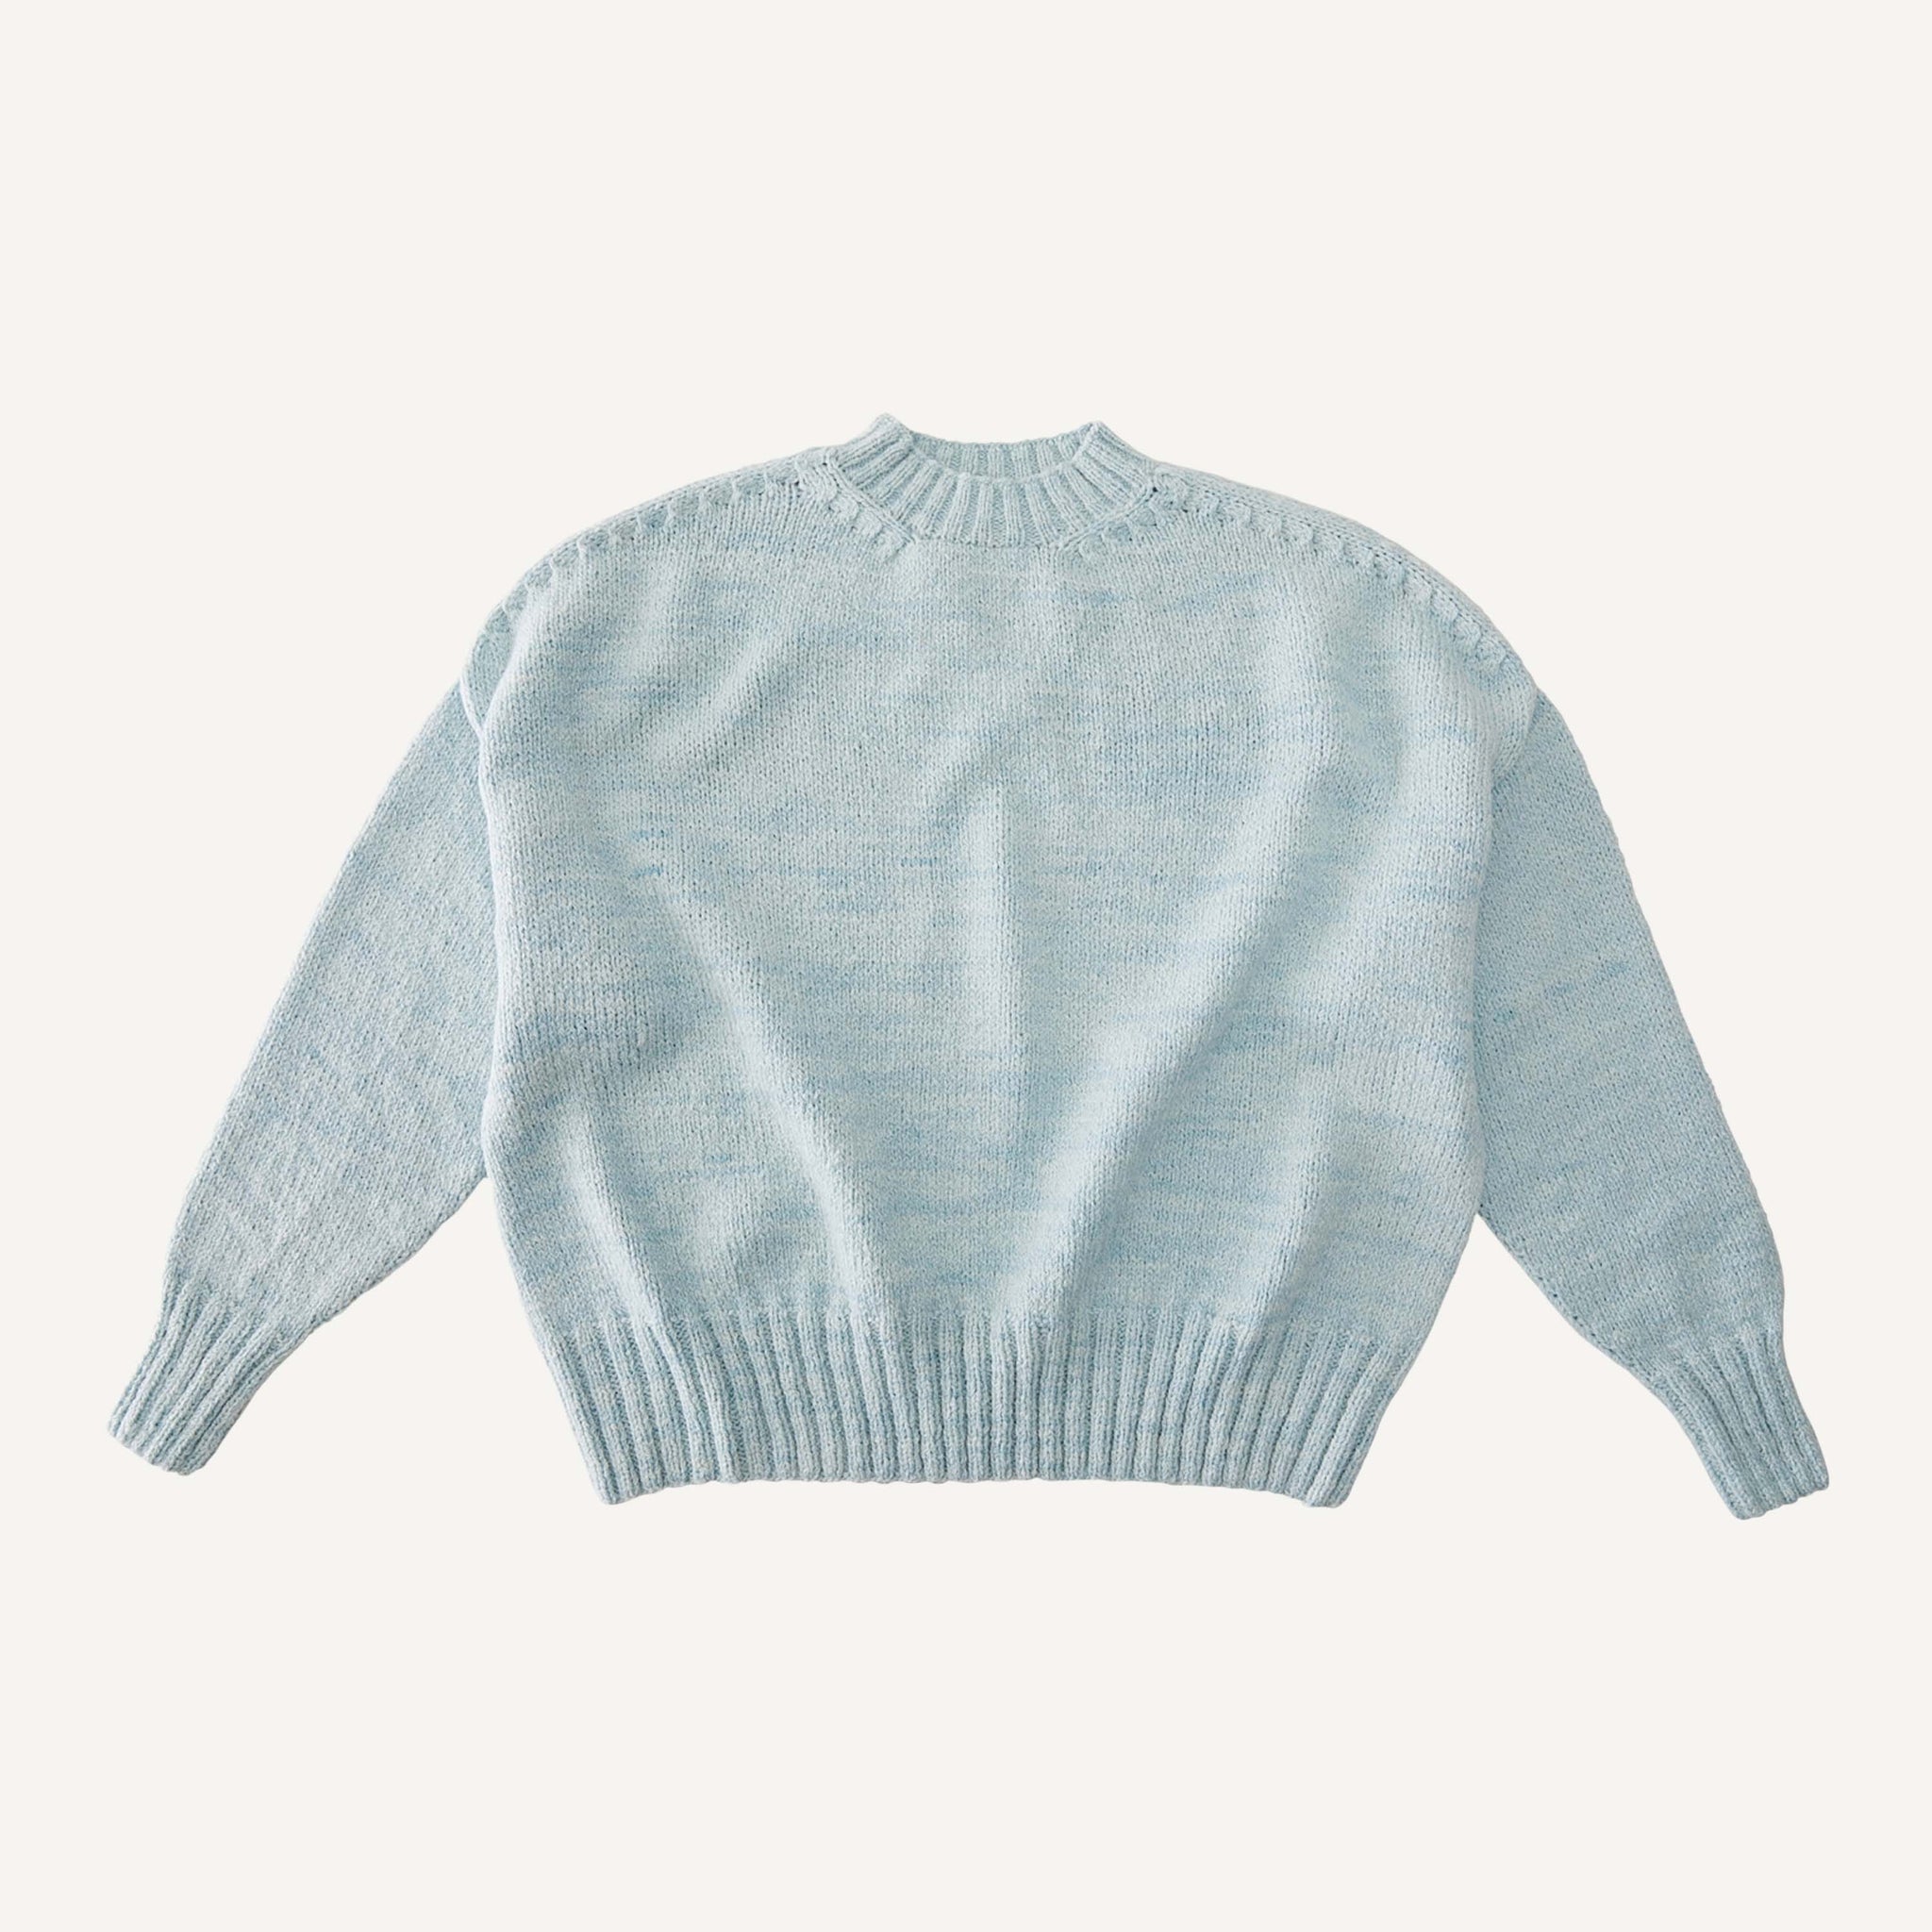 KNITBRARY CREW NECK SWEATER